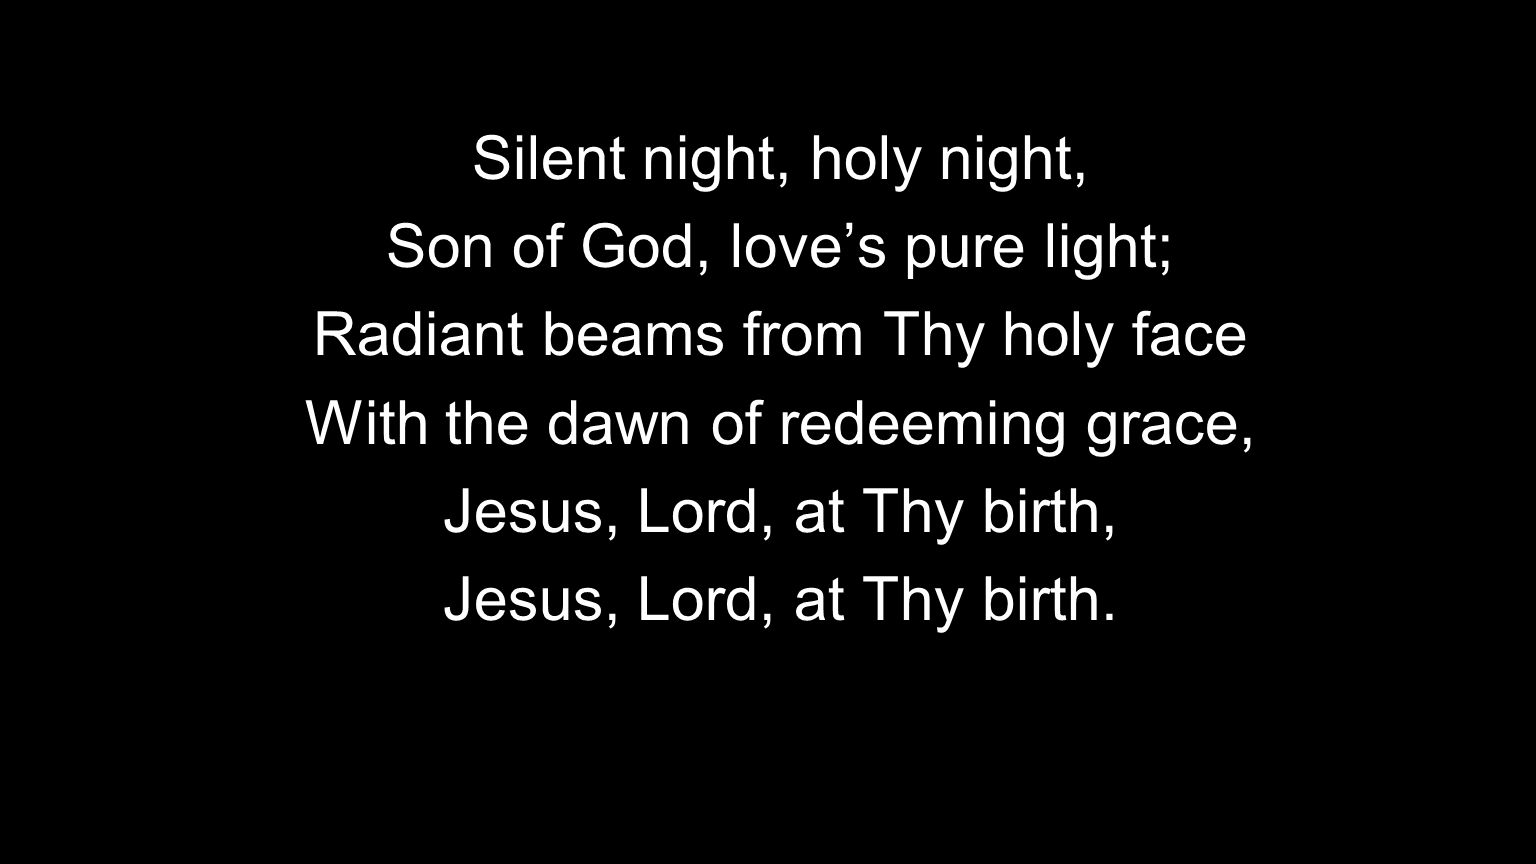 Silent night, holy night, Son of God, love’s pure light; Radiant beams from Thy holy face With the dawn of redeeming grace, Jesus, Lord, at Thy birth, Jesus, Lord, at Thy birth.